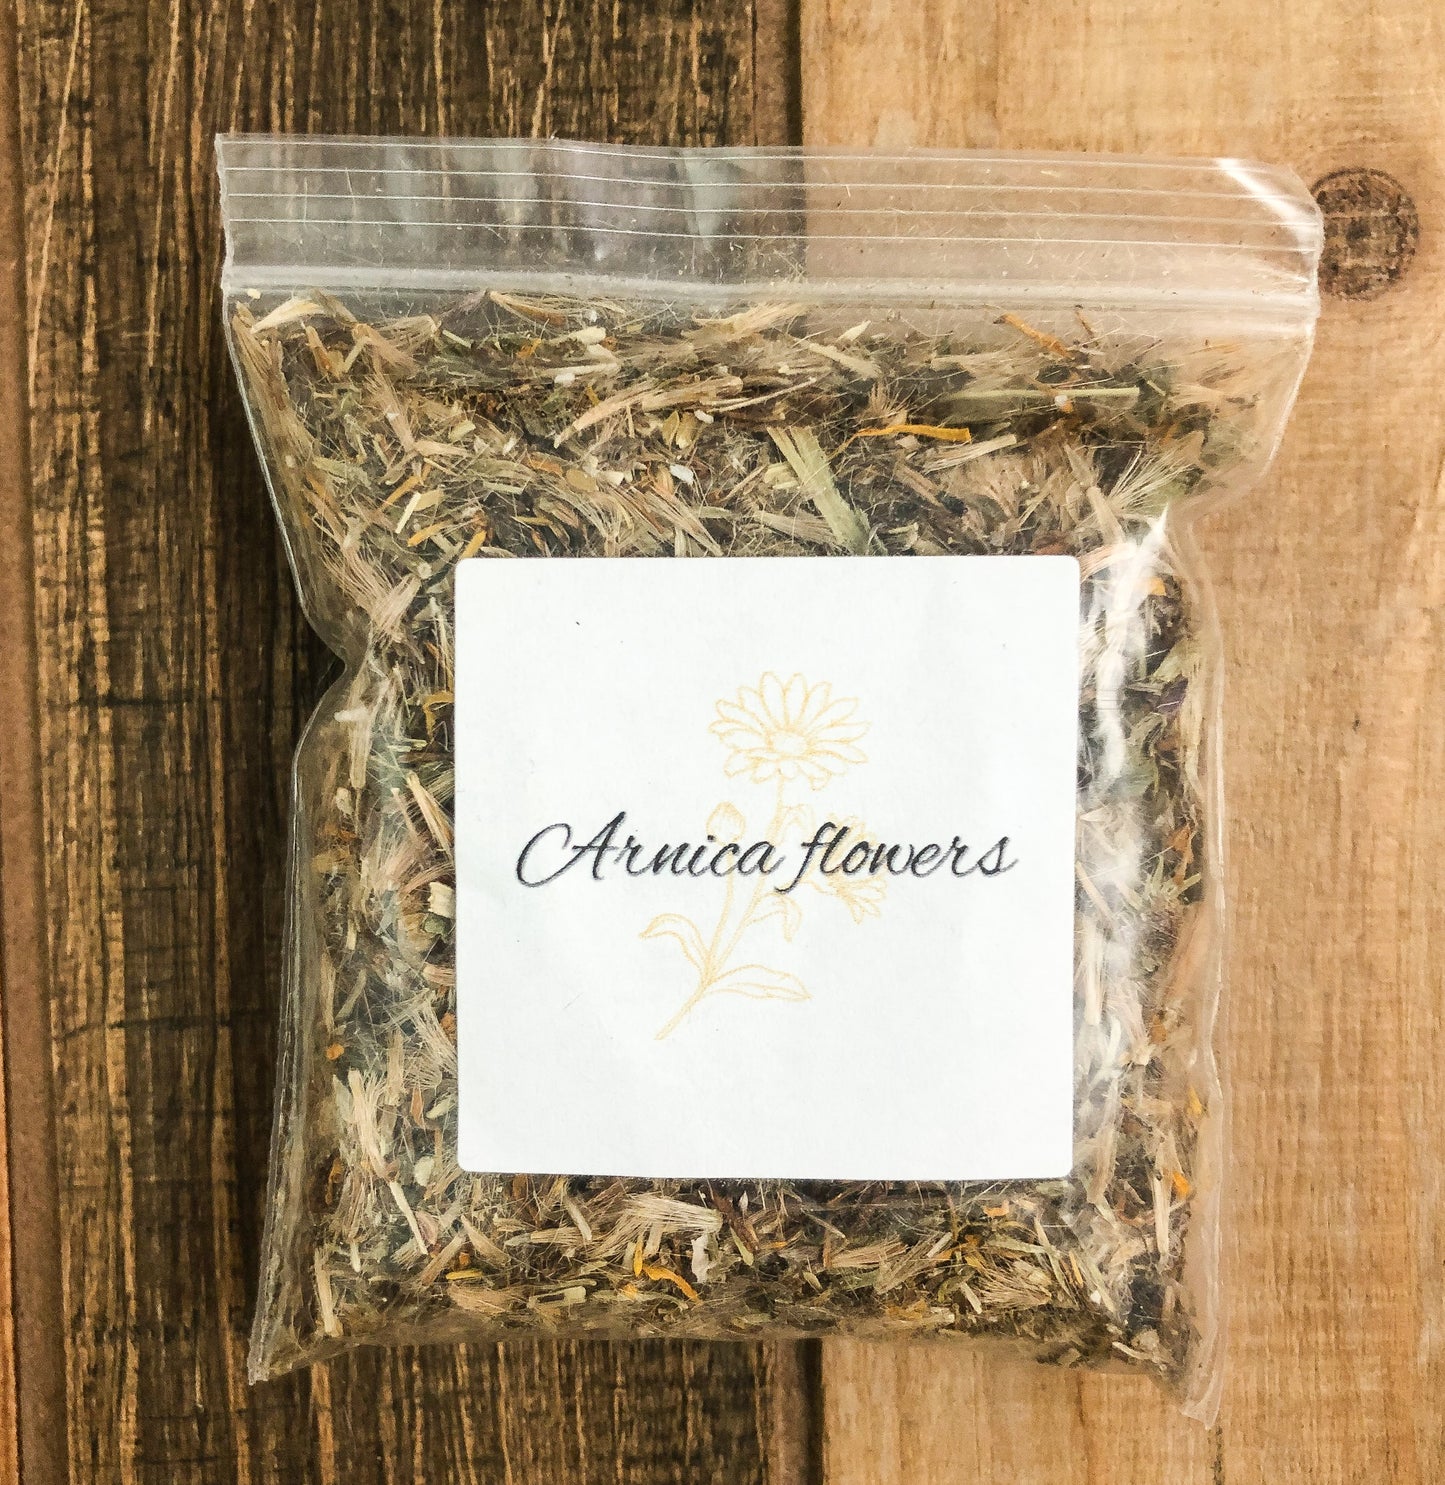 8g bag of dried arnica flowers in a clear plastic bag with a wooden background